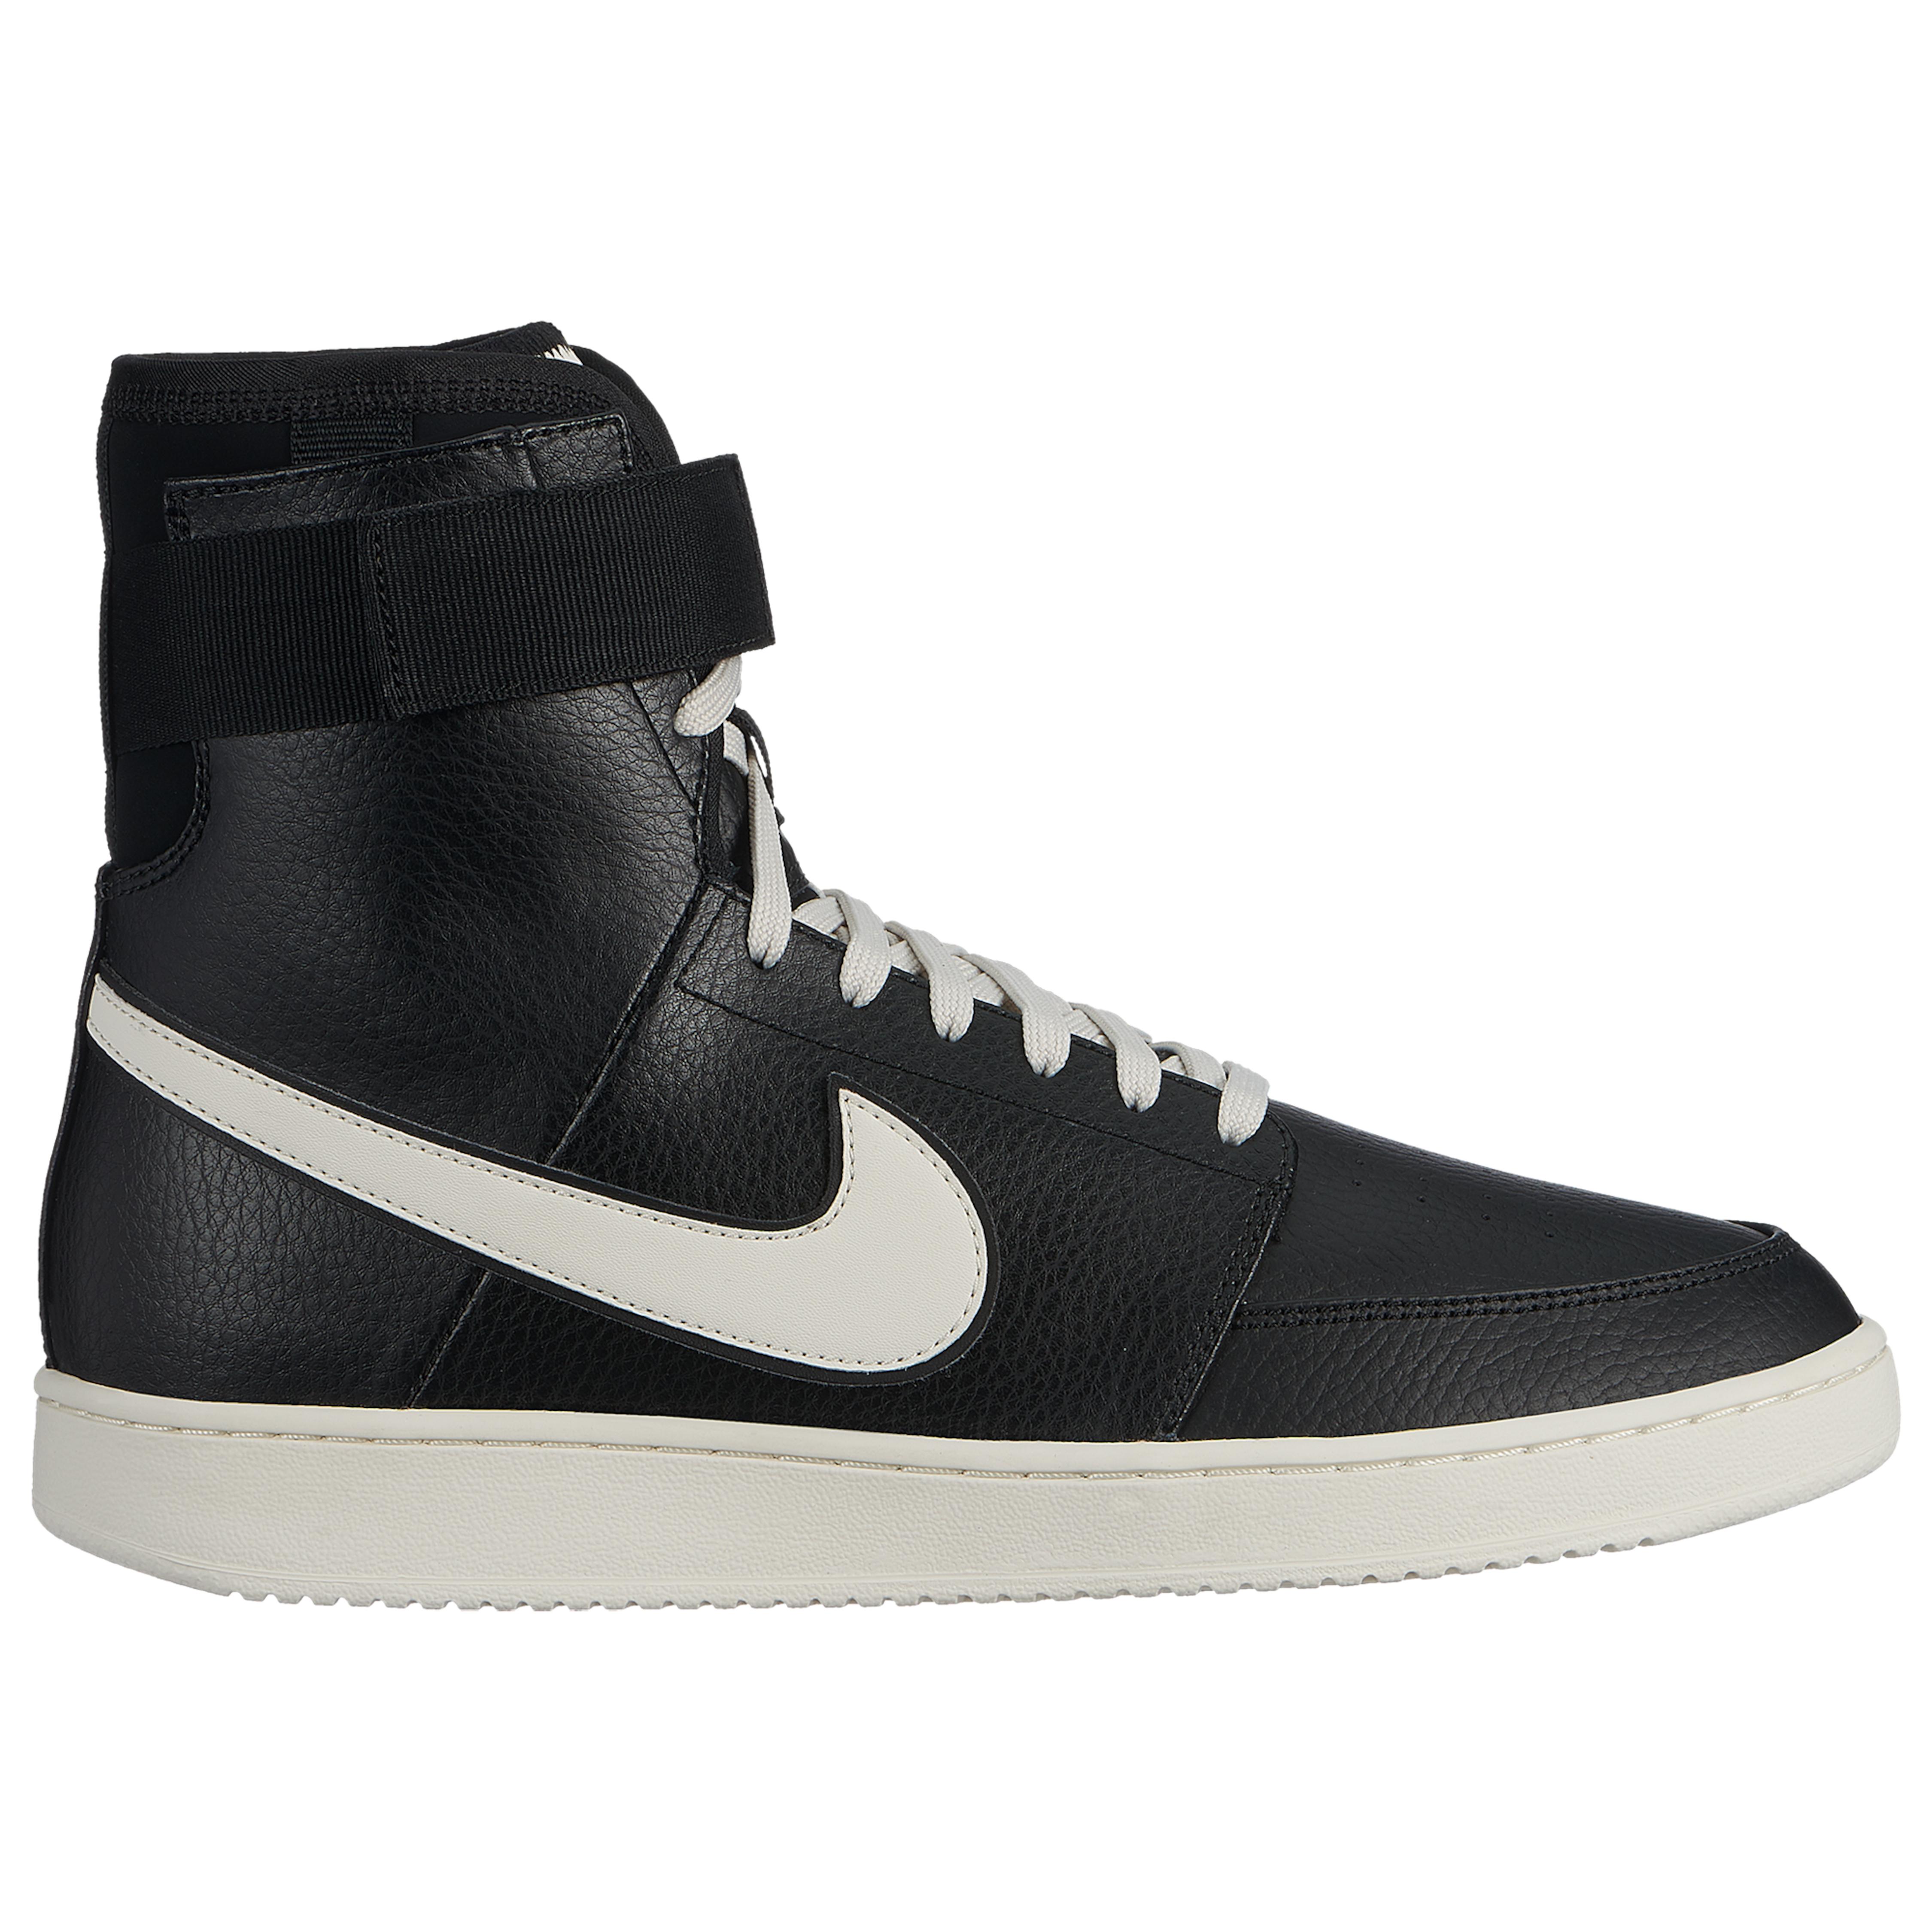 Nike Double Court Shoes - Size 9 in Black for Men - Save 36% - Lyst